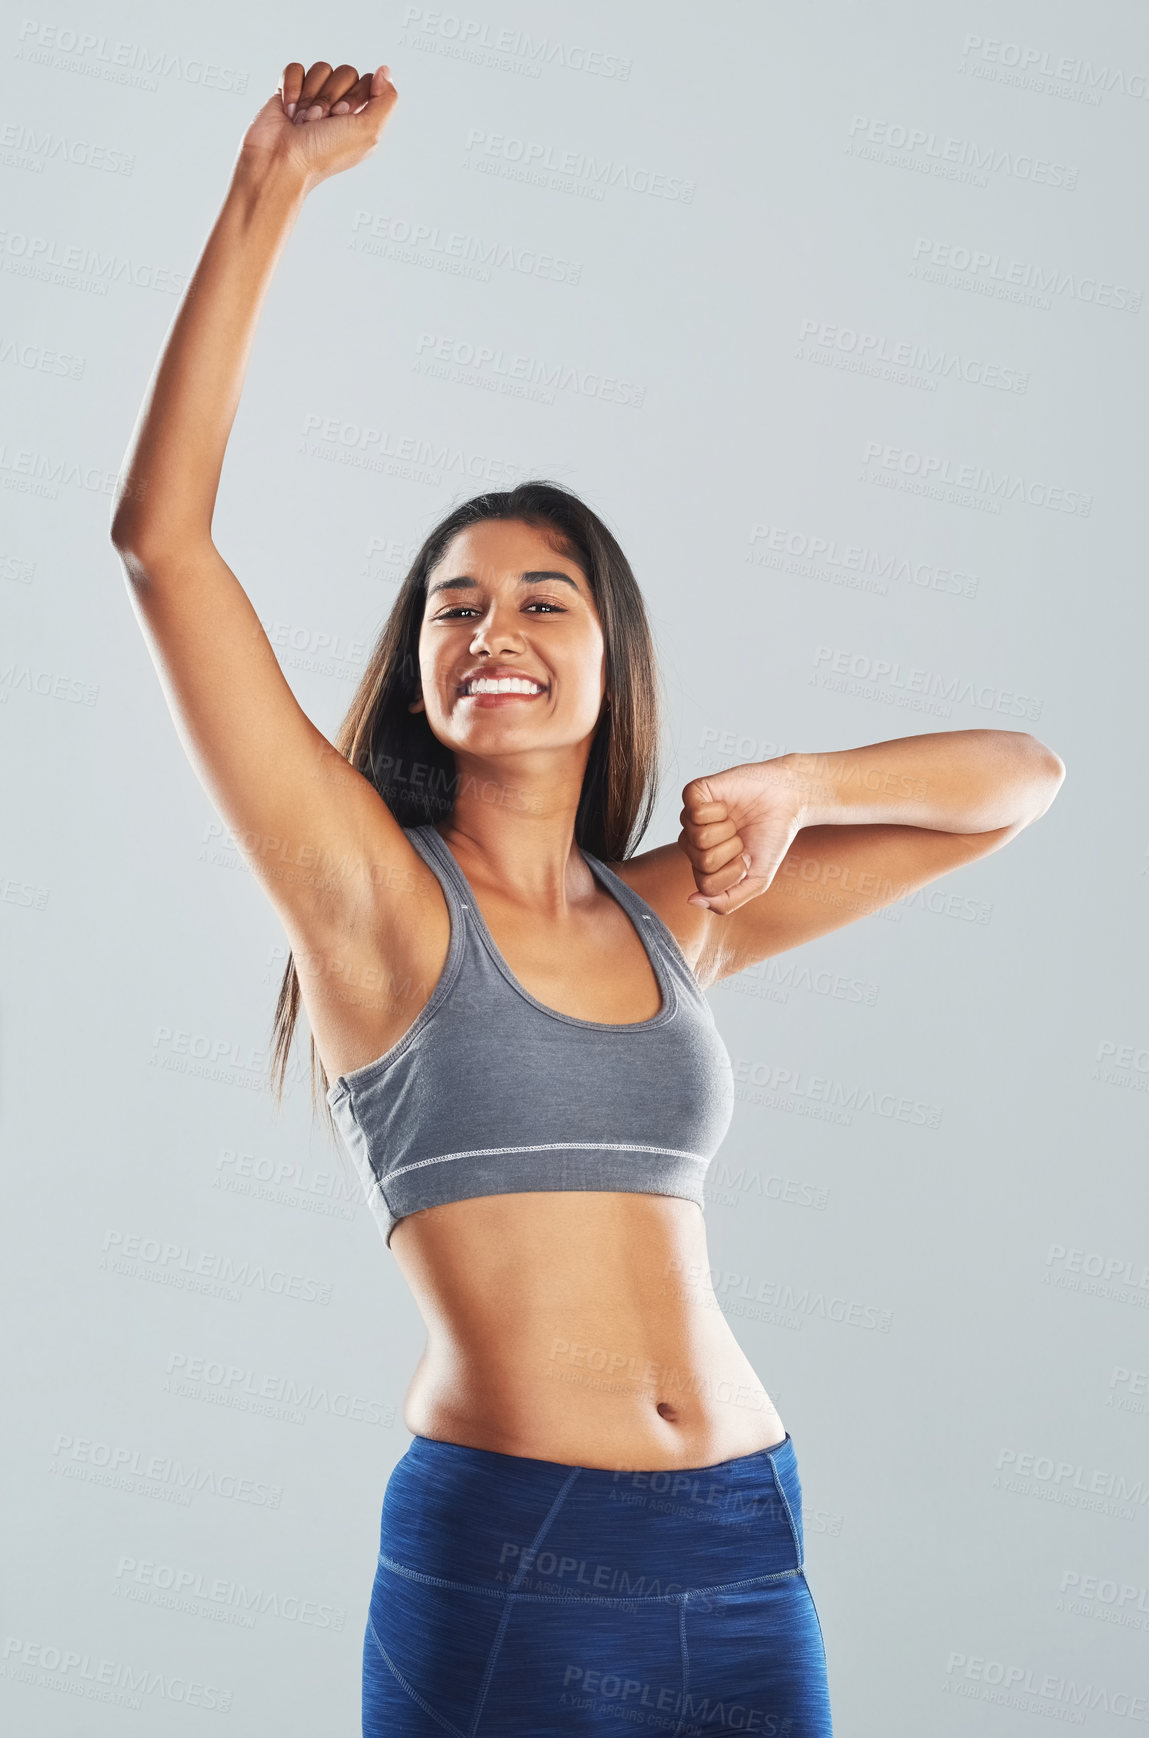 Buy stock photo Cropped studio portrait of an attractive young woman cheering with arms raised against a gray background